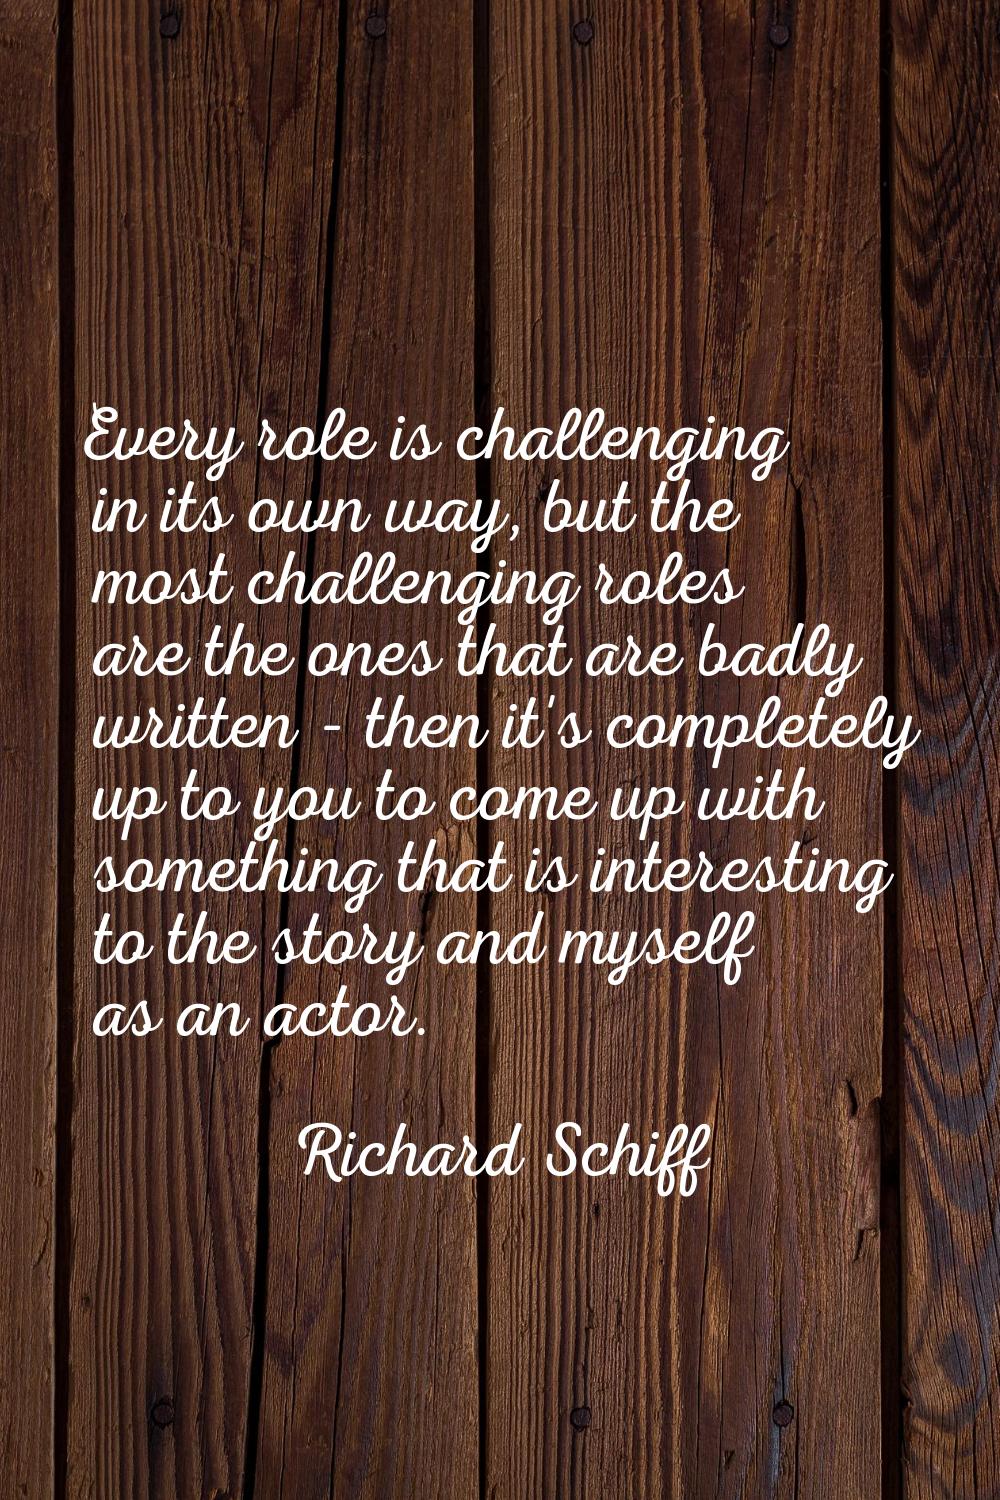 Every role is challenging in its own way, but the most challenging roles are the ones that are badl